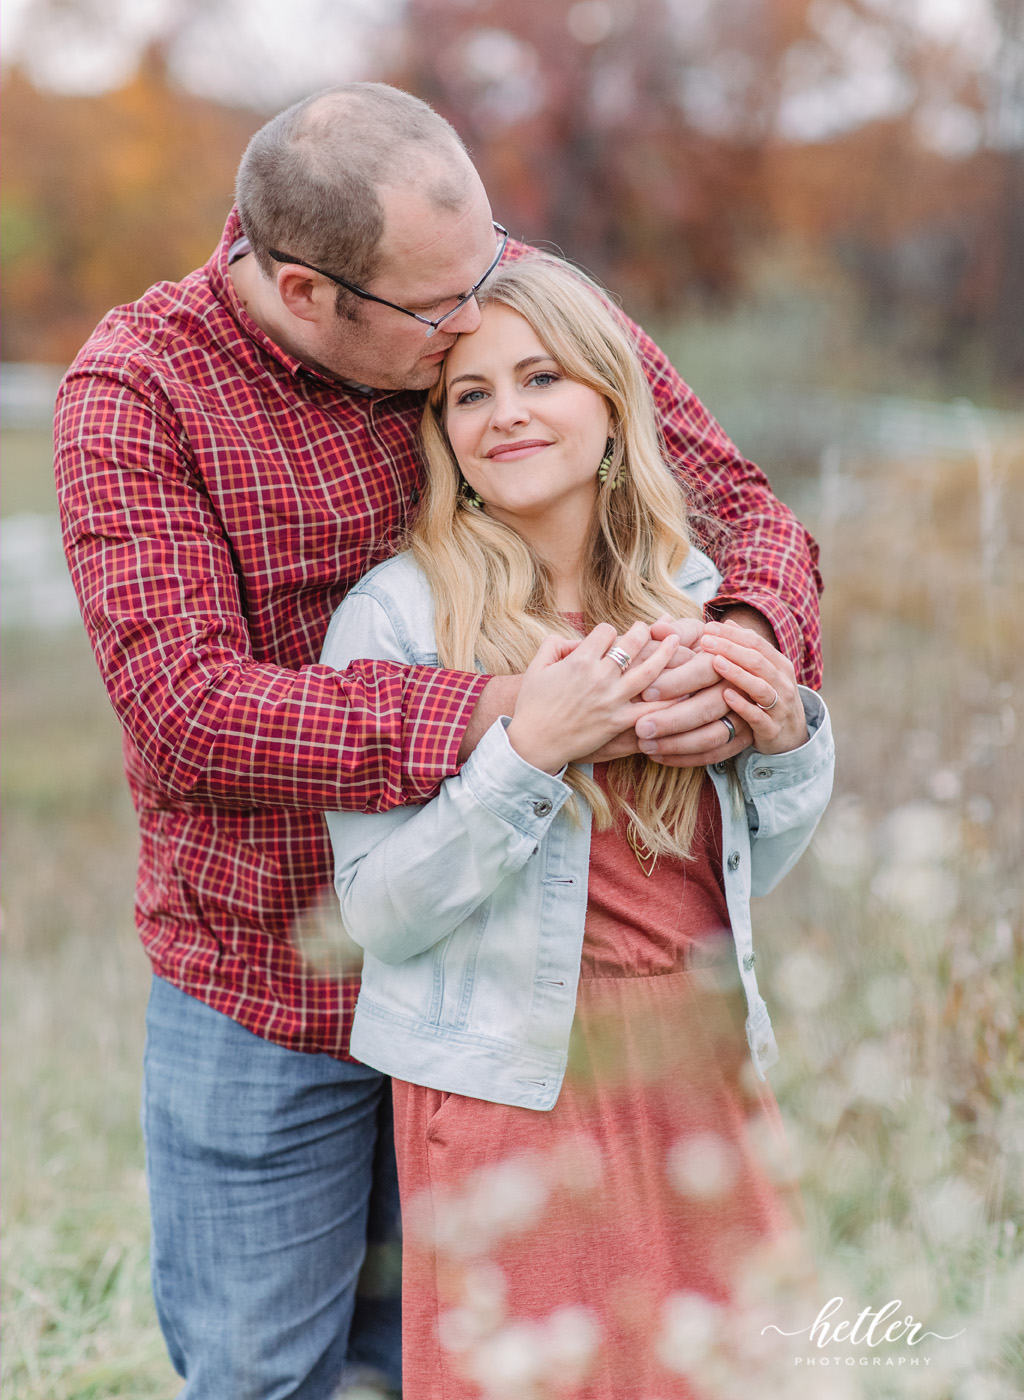 Extended family photos in Grand Rapids Michigan at Hydrangea Blu barn with gorgeous fall colors